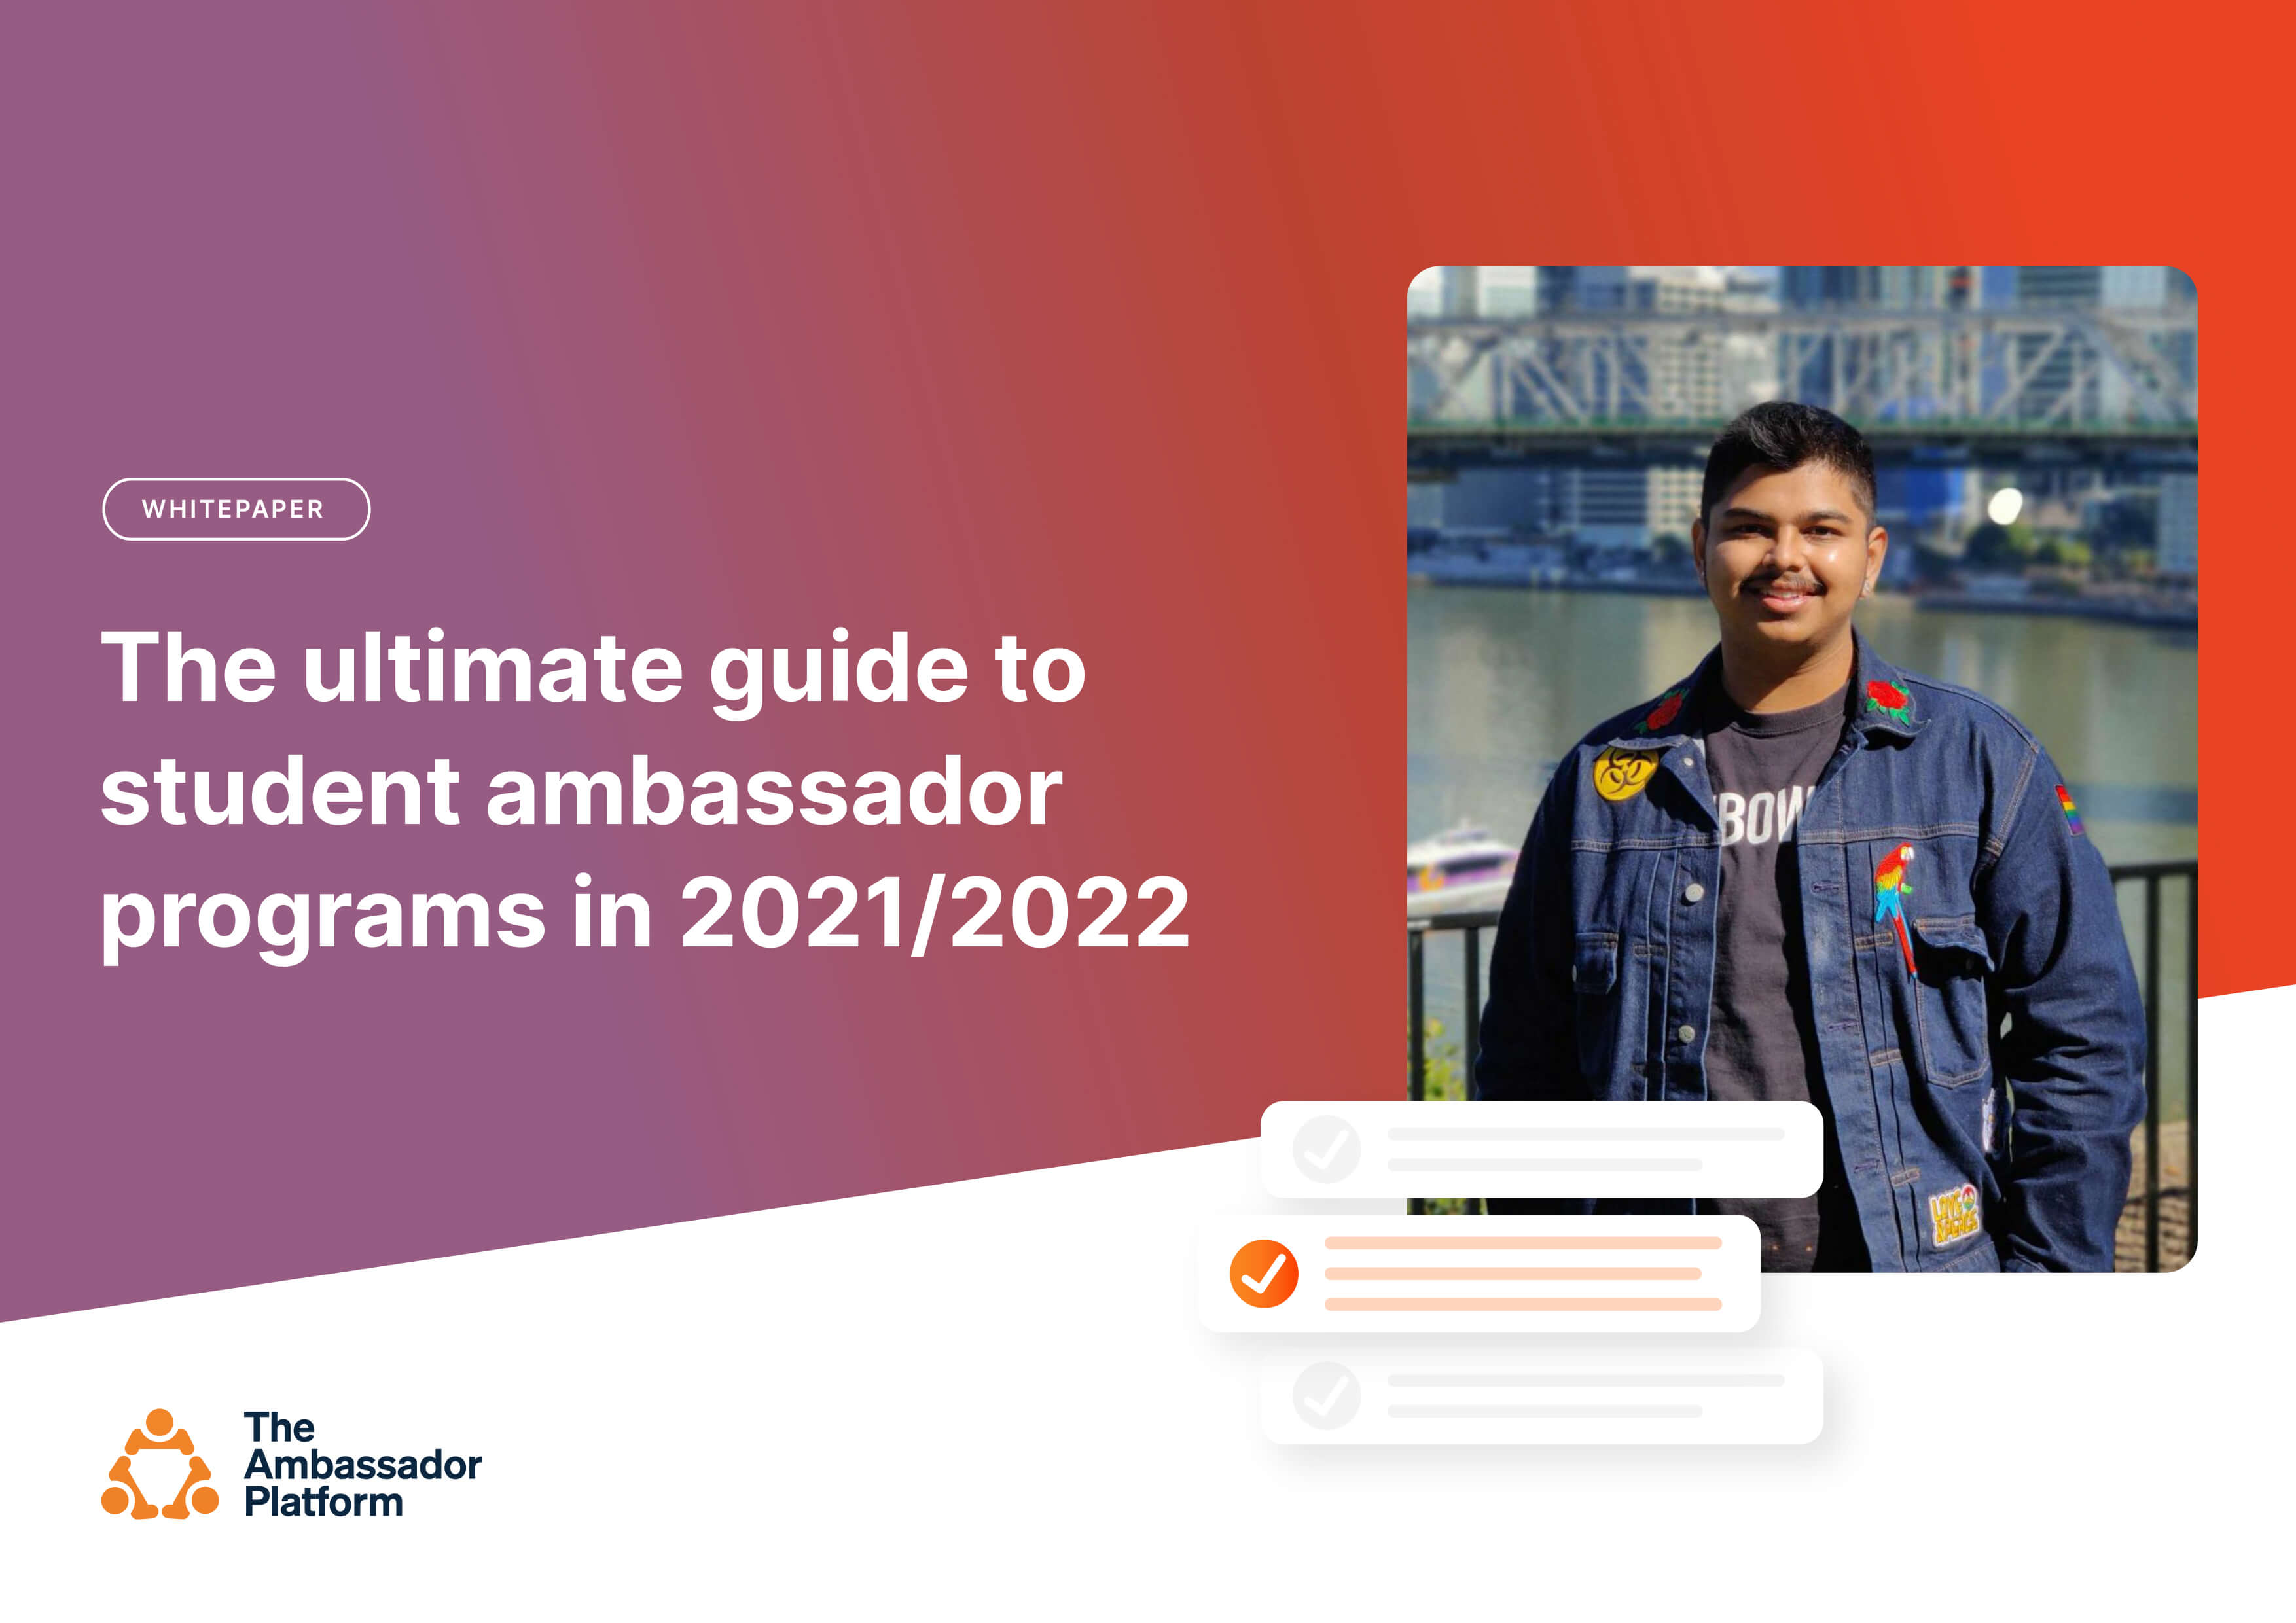 TAP_Whitepaper_The ultimate guide to Student Ambassador programs in 2021-22_Front-Cover-min